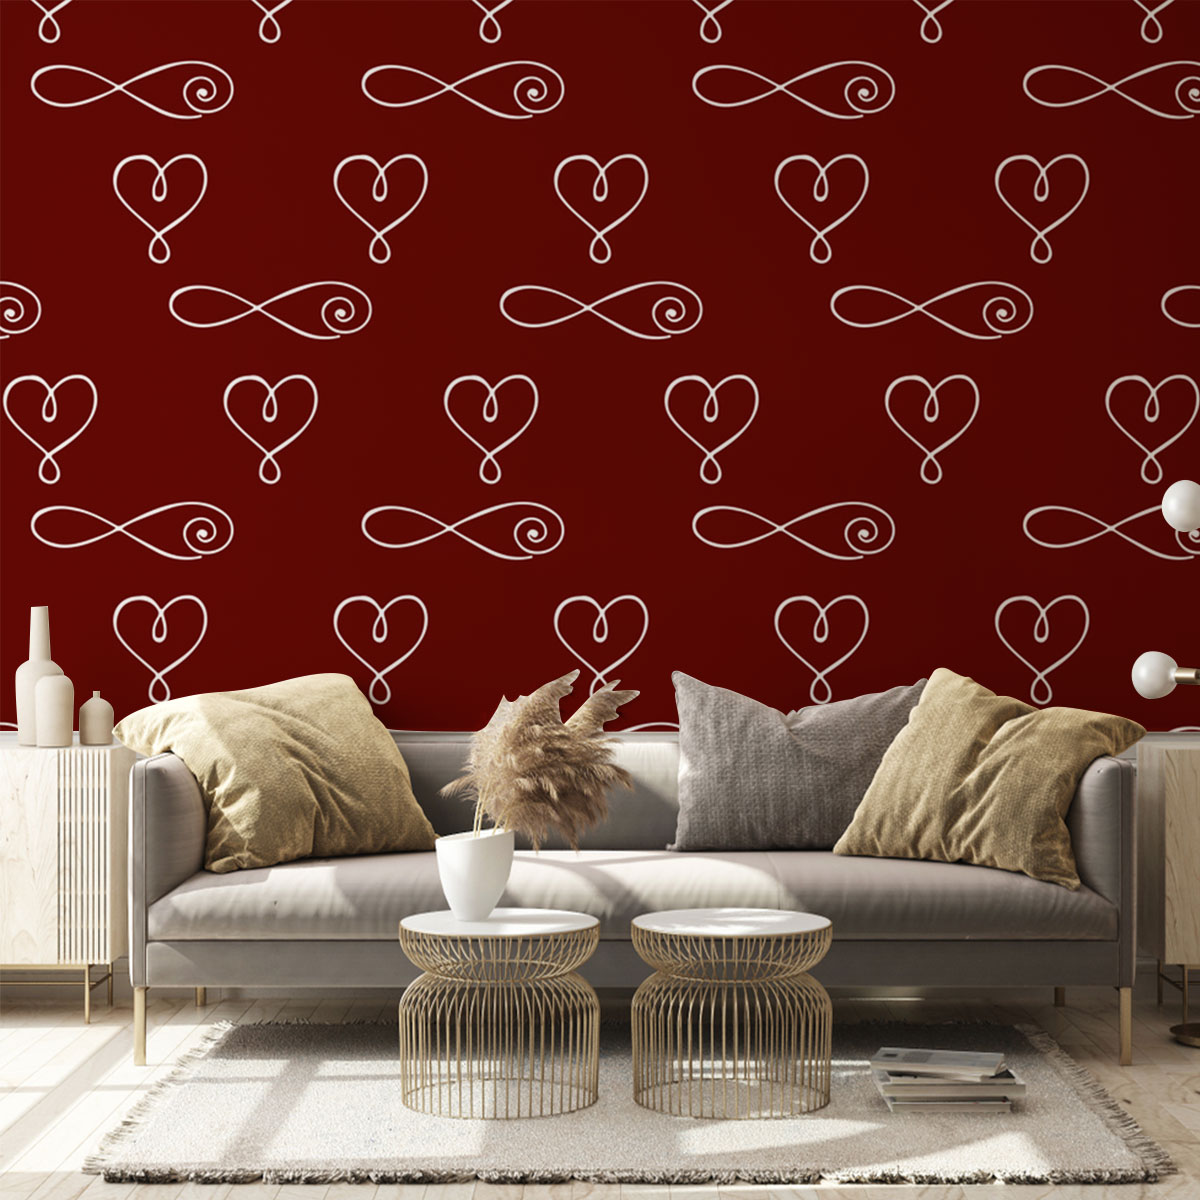 Bohemian With Hearts And Signs Of Infinity Wall Mural